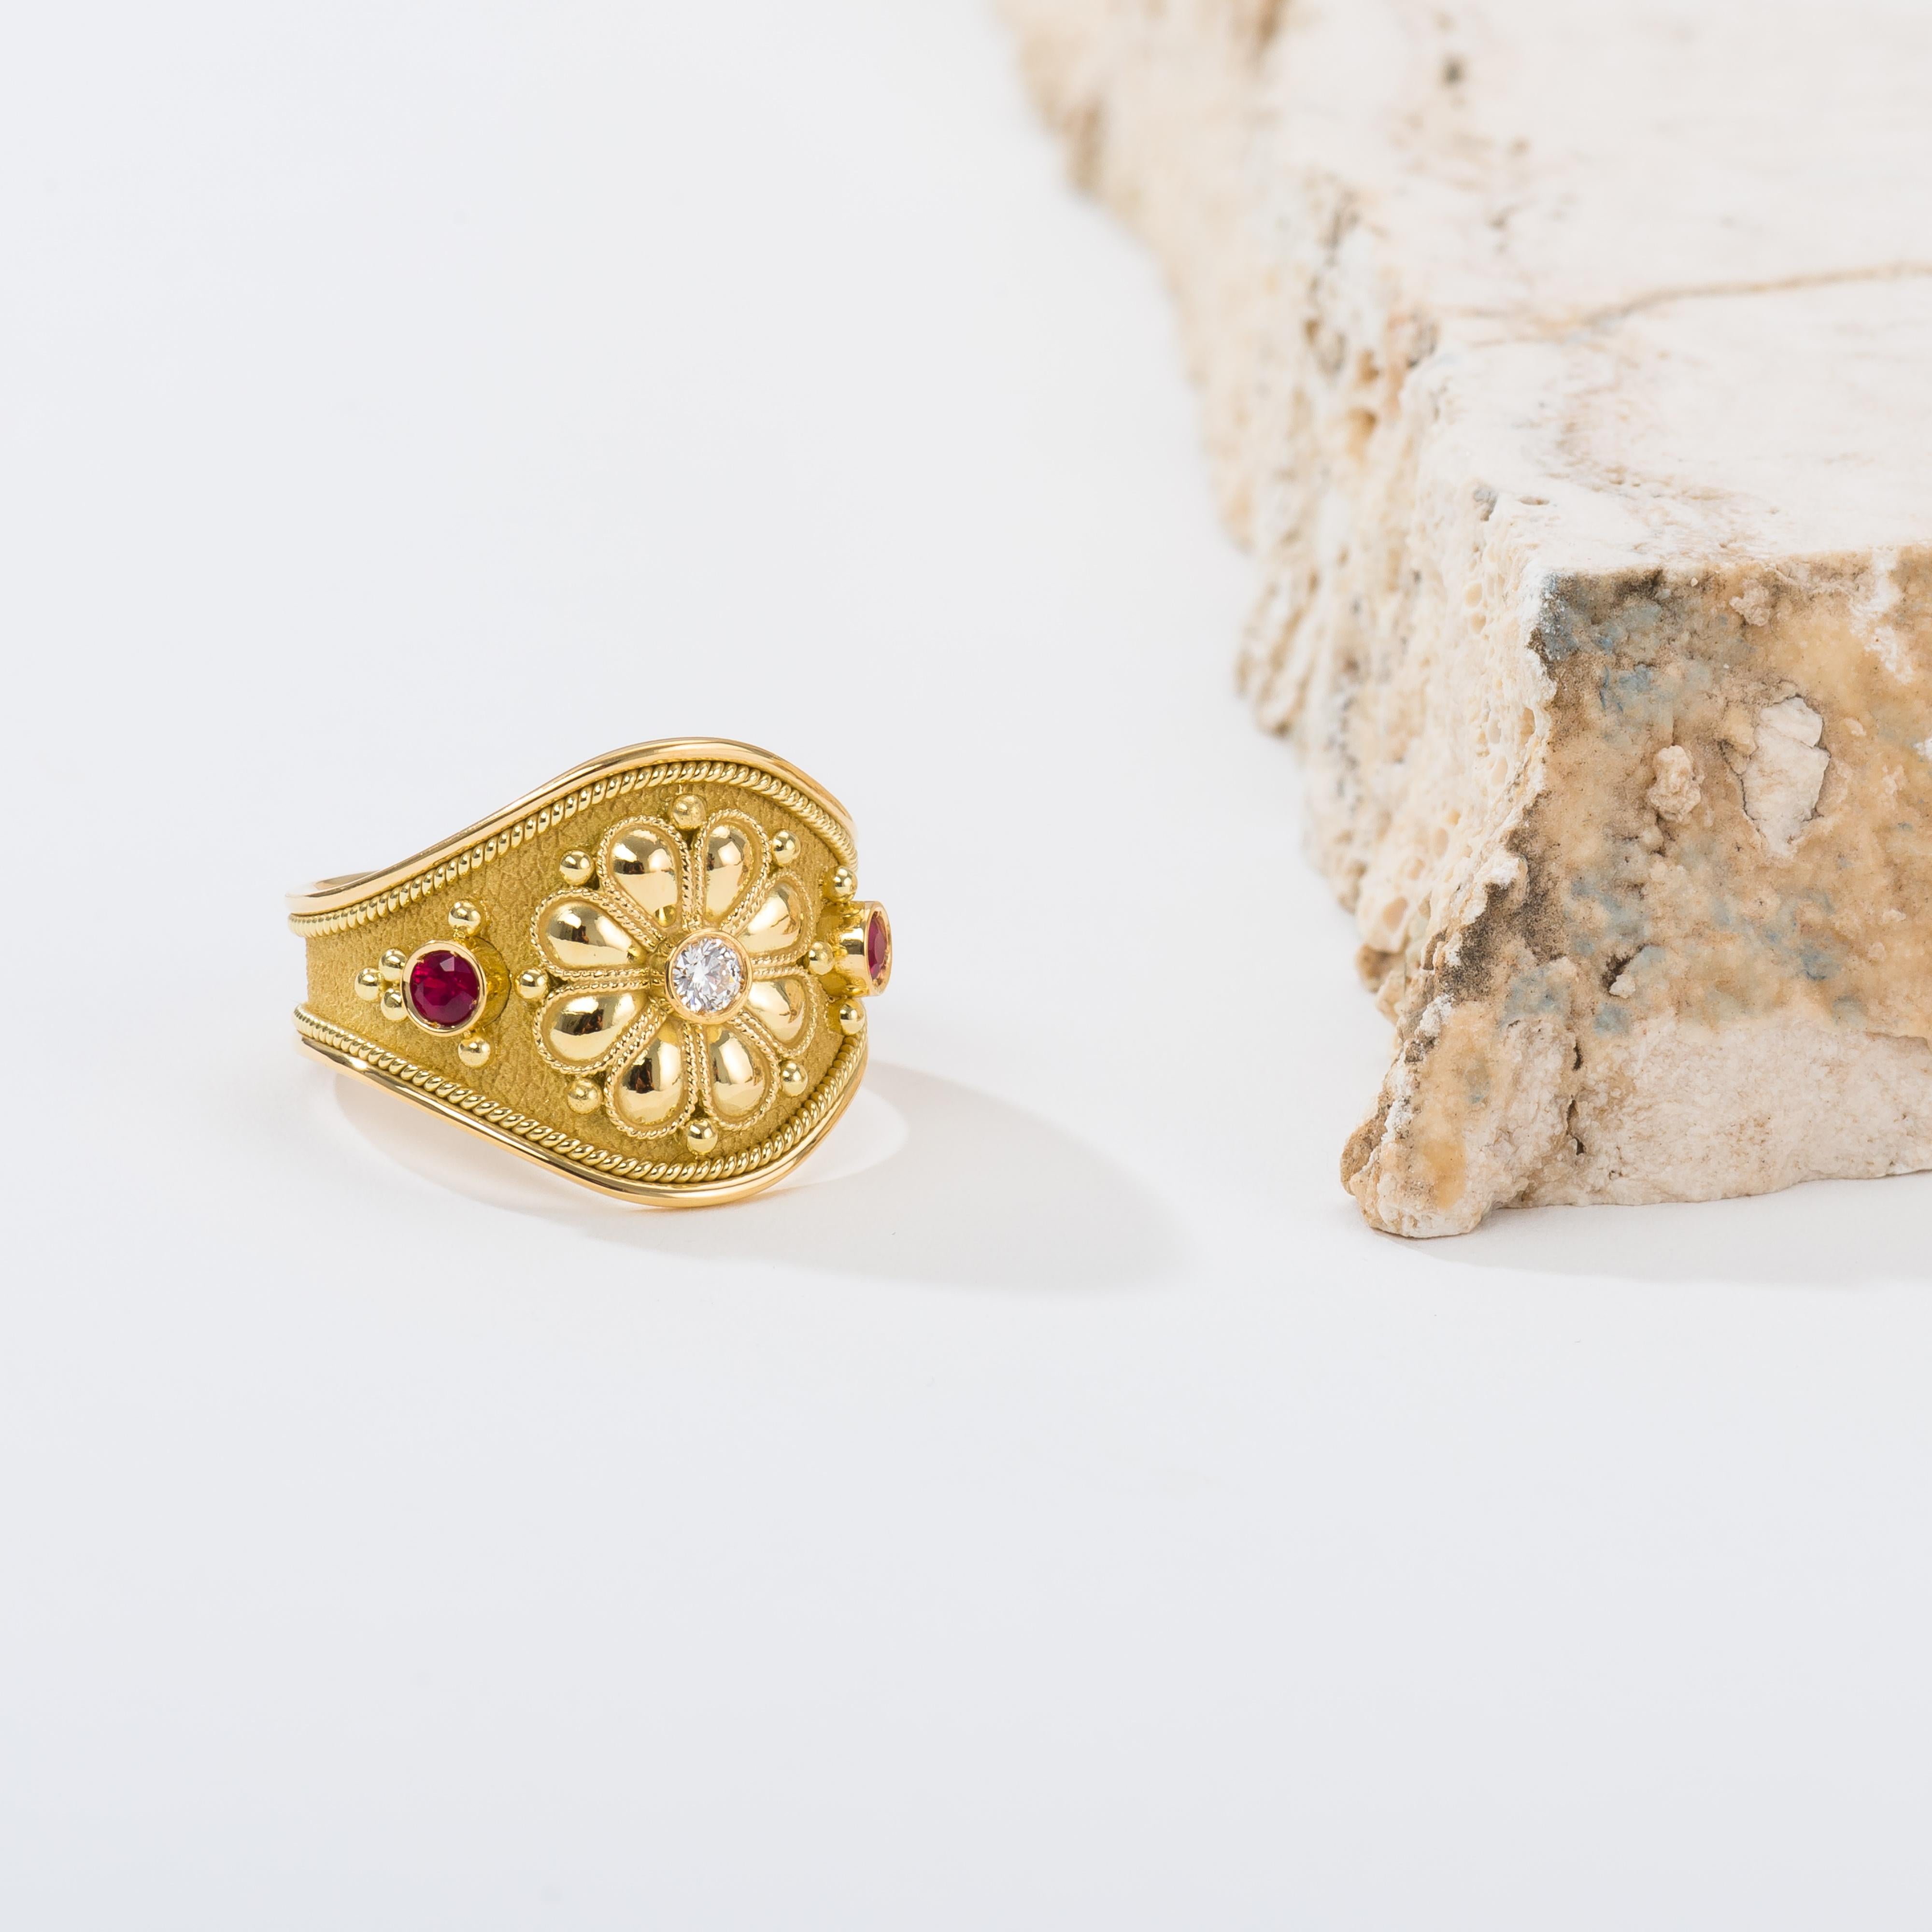 A luminous gold shiny daisy, adorned with a radiant diamond center, and embraced by two vibrant rubies, makes this gold ring a masterpiece of elegance and natural beauty, a daily reminder of enduring grace and timeless allure.

100% handmade in our